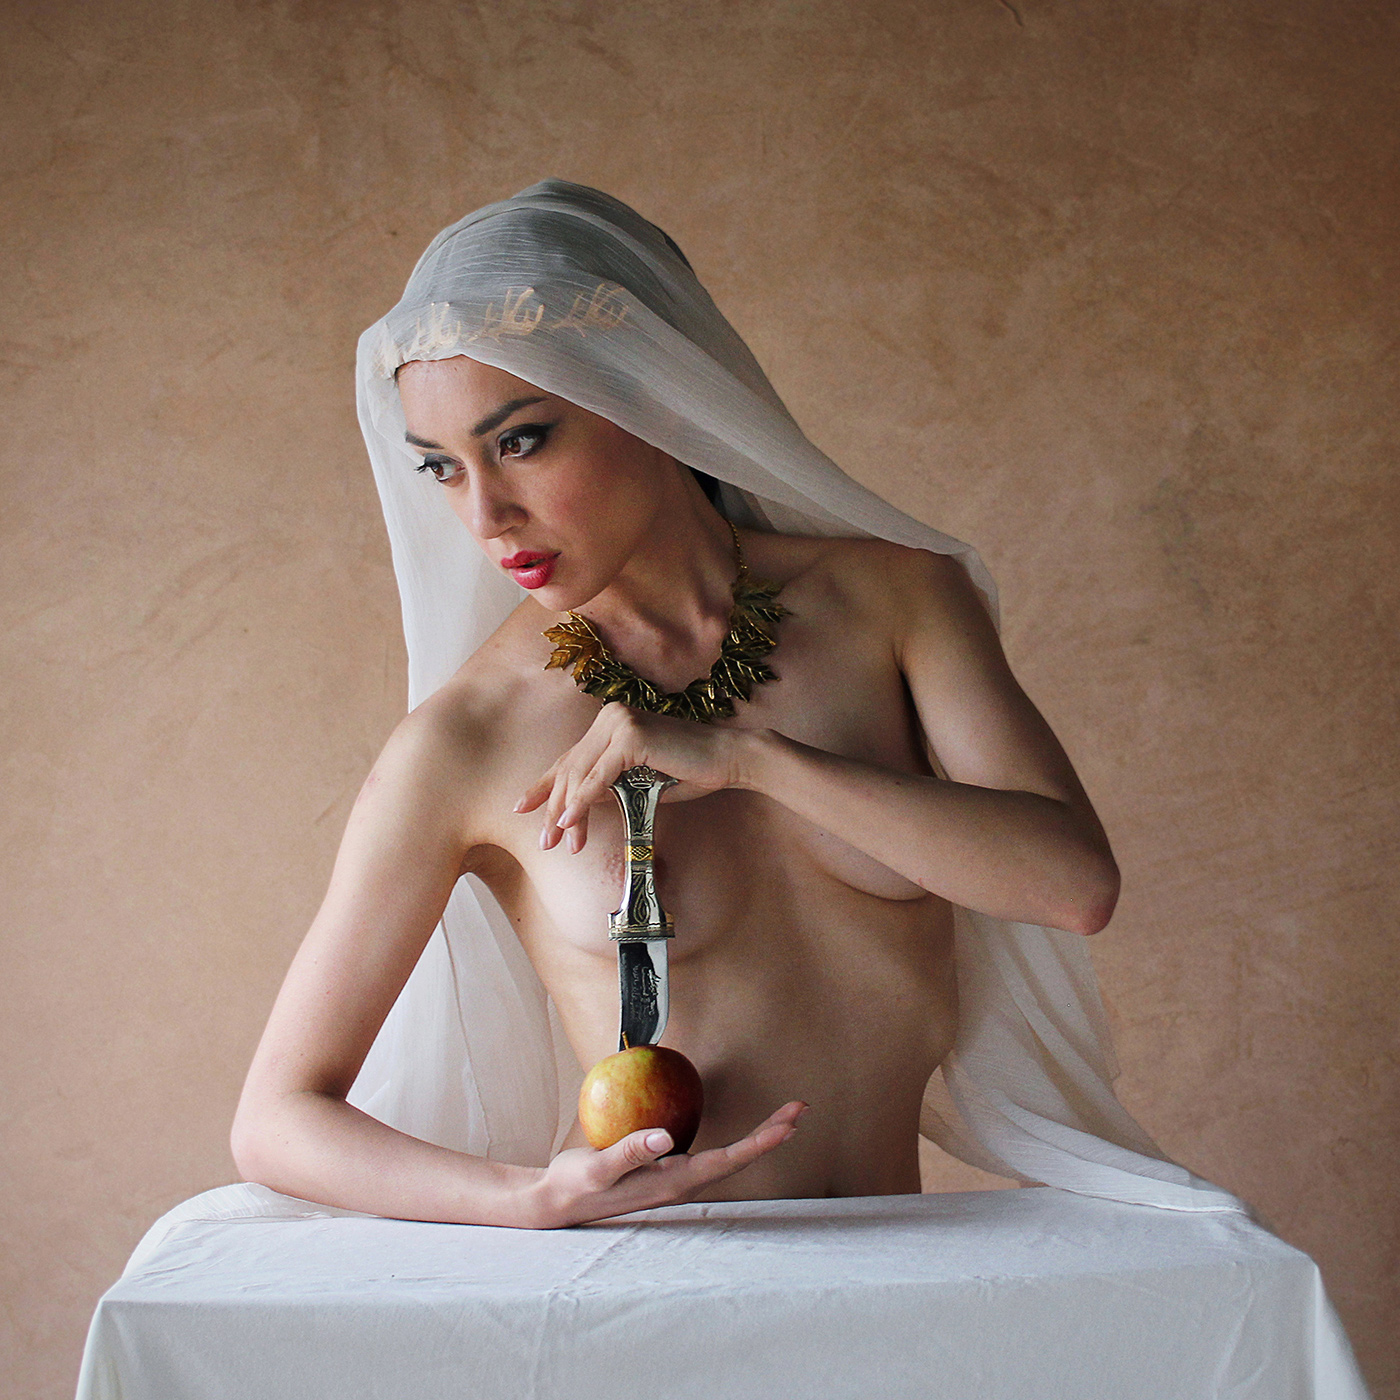 Artistic semi-nude photo. Veiled woman with a gold necklace holds a Jordanian dagger and an apple. Textured wall backdrop, natural light. Exudes exotic desert ambiance. veiled seduction, artistic nude, nude photography, nude photo, nude photo print, nude art photo, female nude art, Fine art nude photography, Elegant nude photography, Artistic nude portraits, Creative nude photography, Sensual artistic nudes, Artistic nude poses, Conceptual nude art, Romantic nude photography, Graceful nude portraits